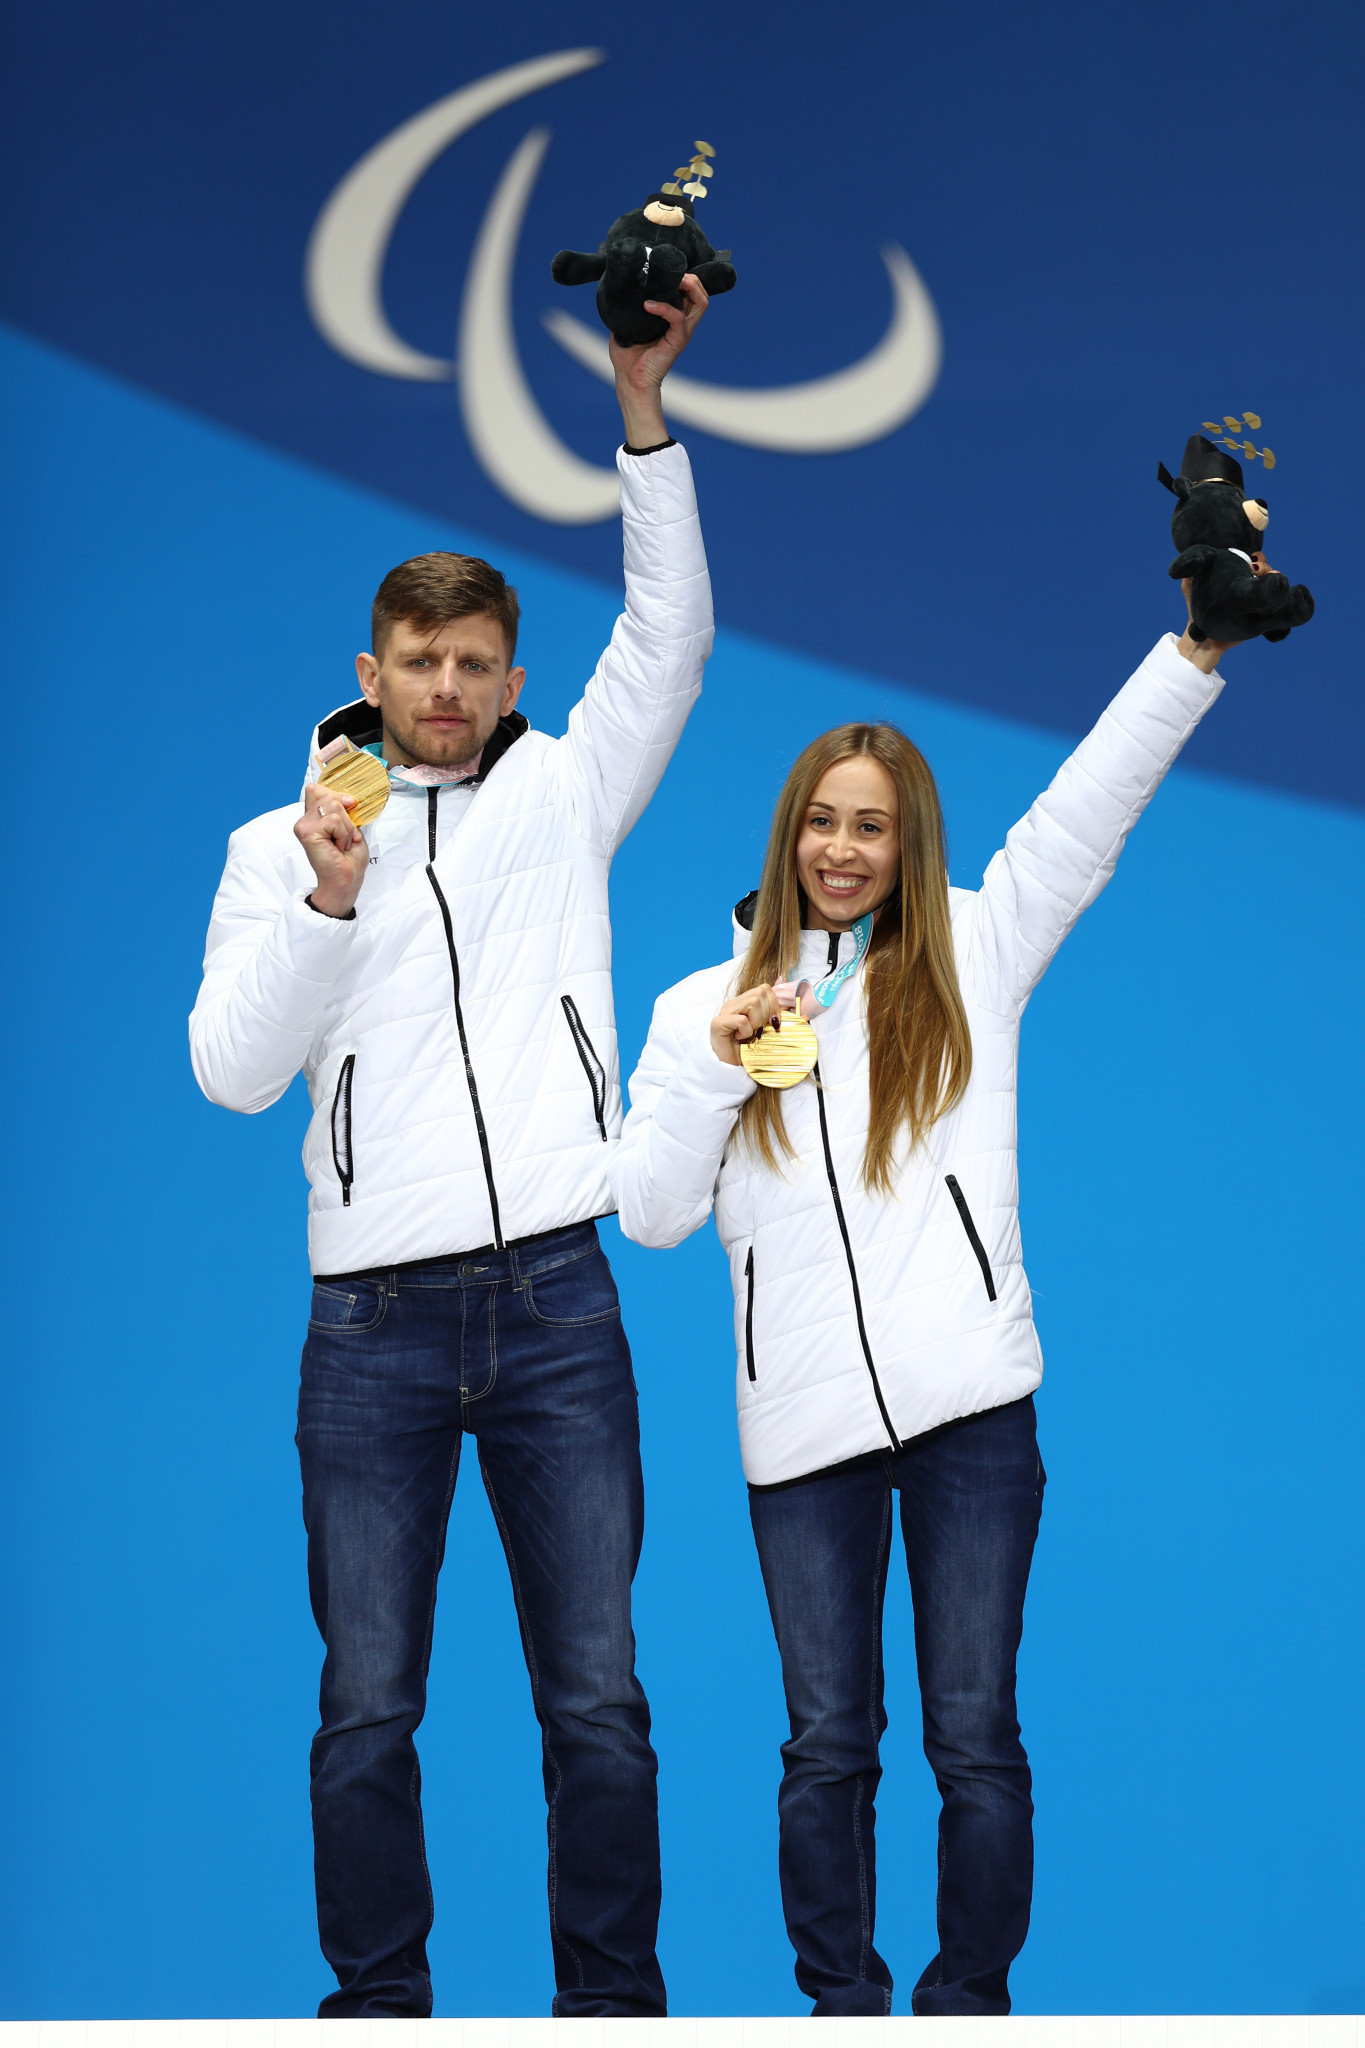 Mikhalina Lysova, right, and her guide Alexey Ivanov, left, won five medals at Pyeongchang 2018 ©Getty Images